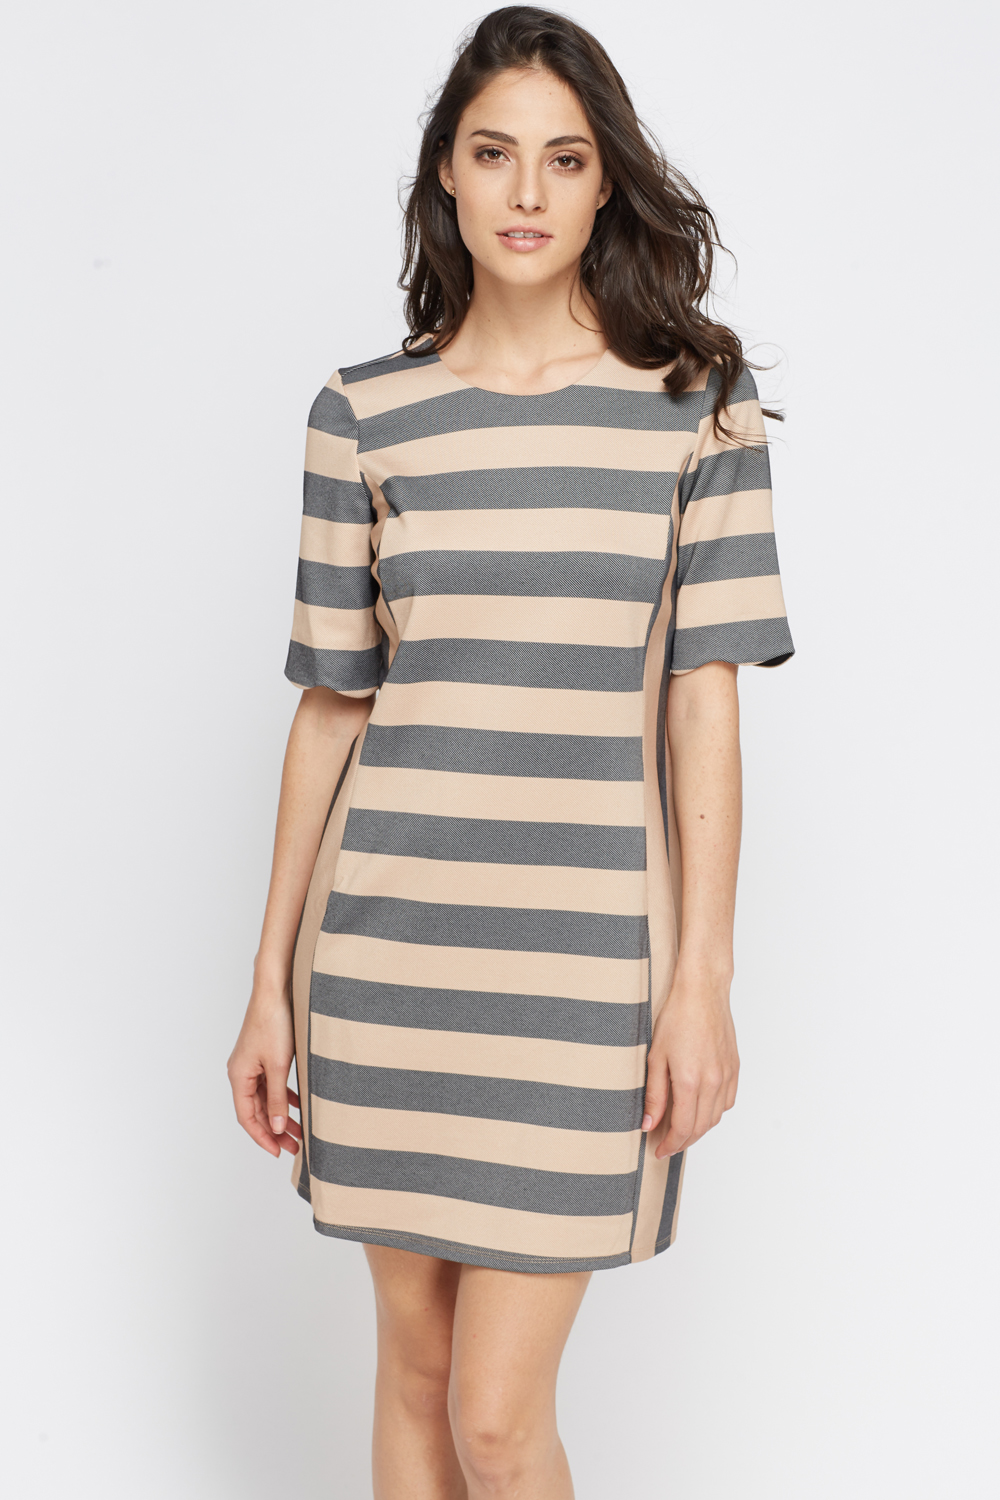 Beige Striped Fitted Dress - Just $7